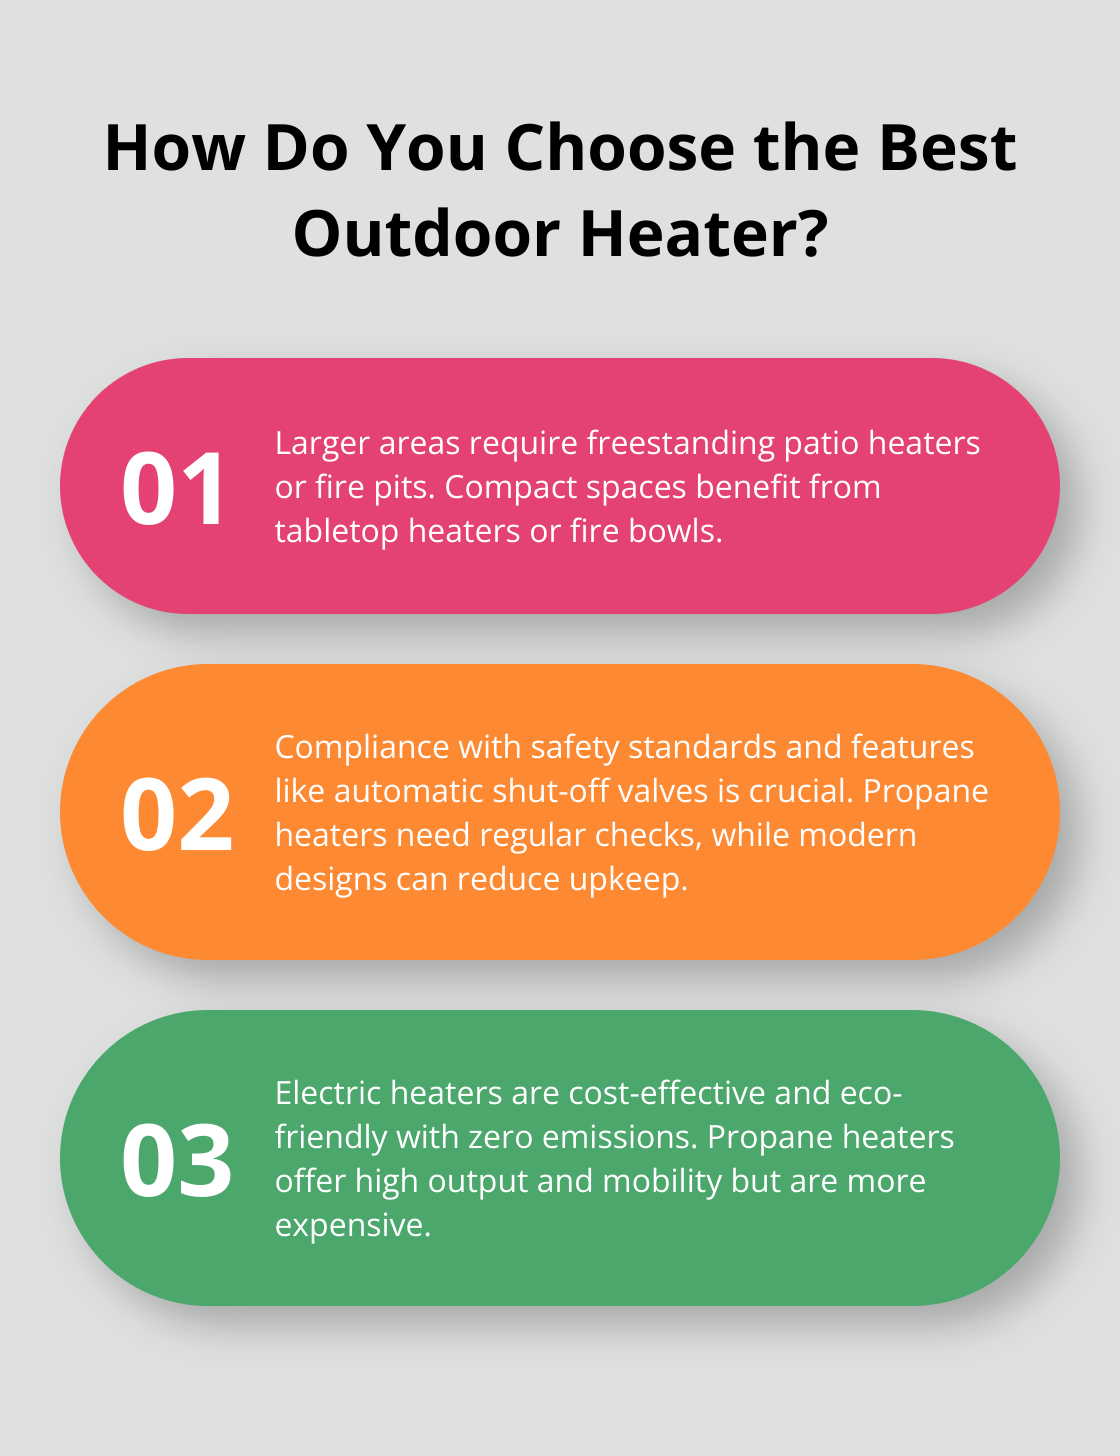 Fact - How Do You Choose the Best Outdoor Heater?